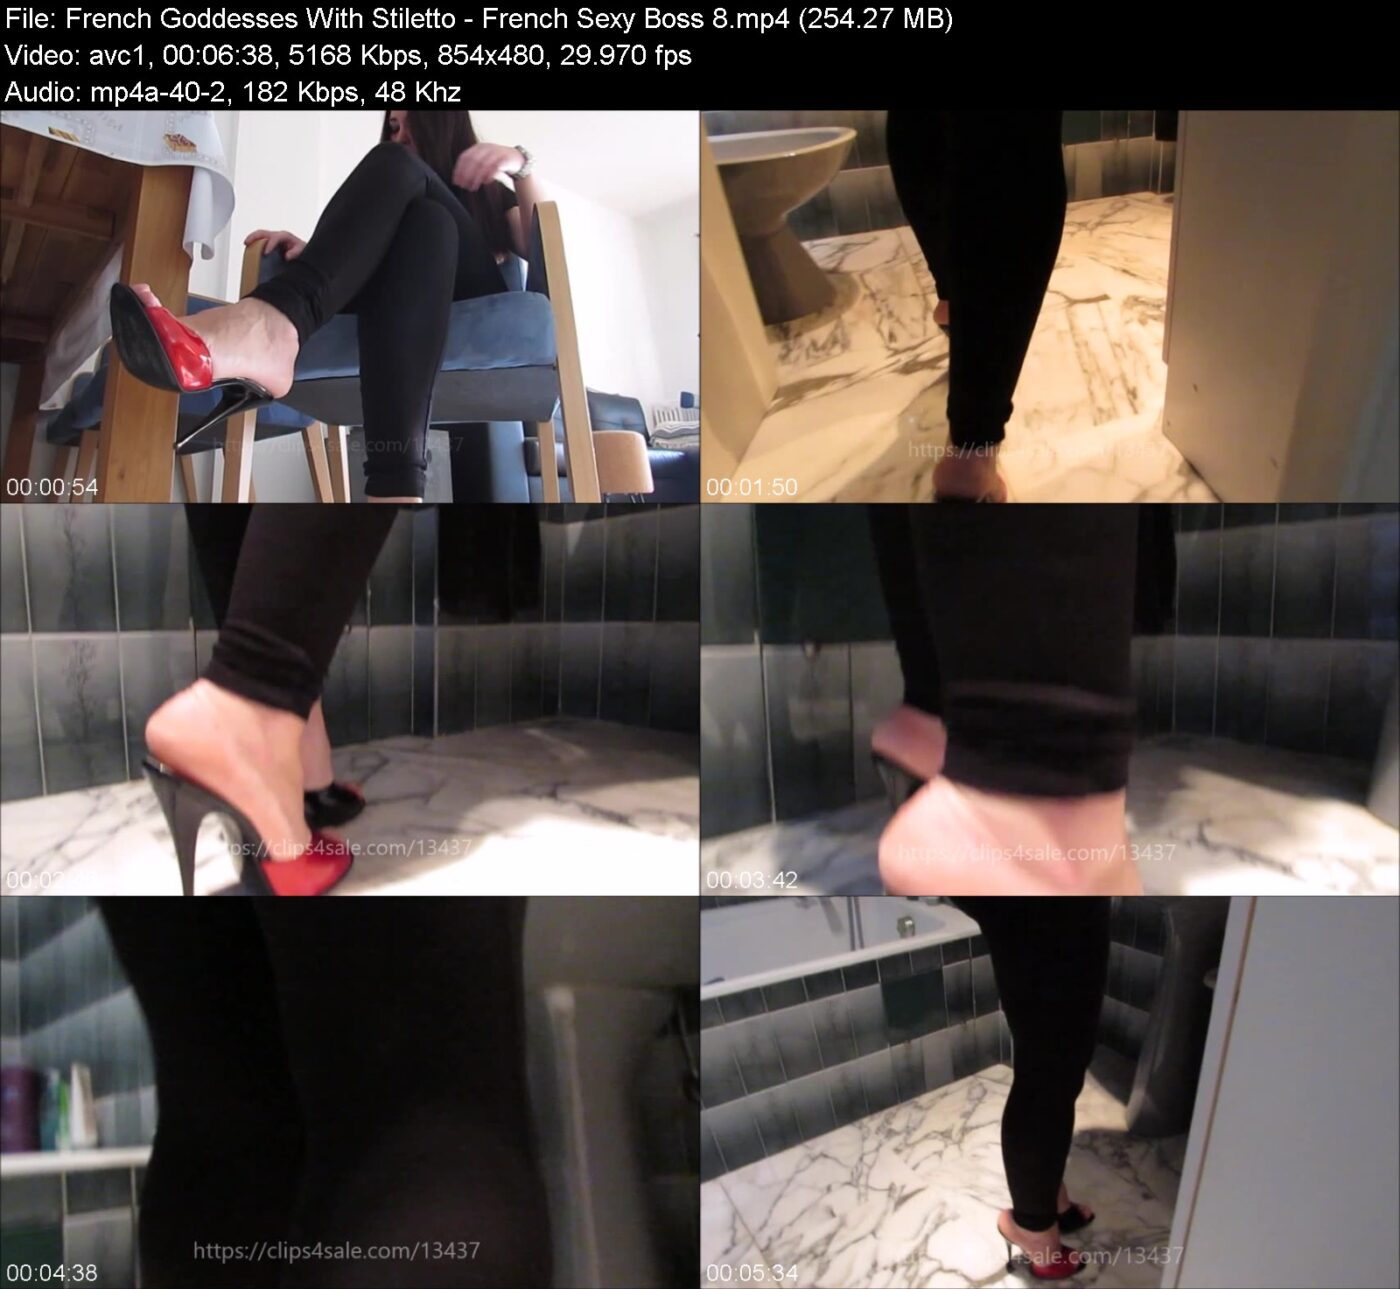 French Goddesses With Stiletto in French Sexy Boss 8